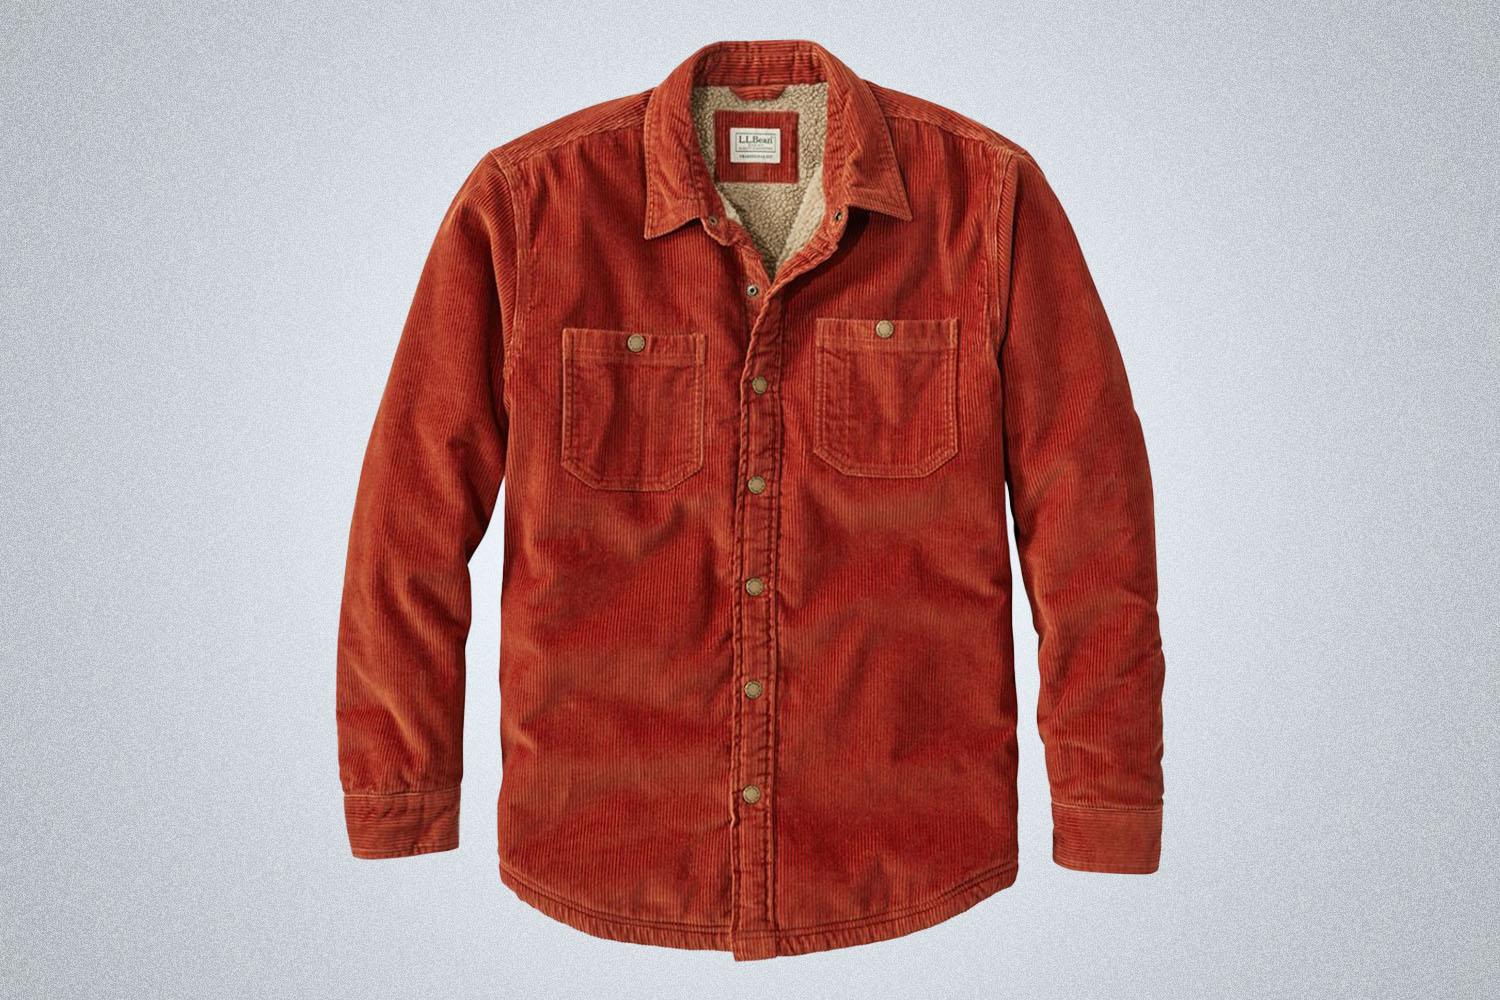 A red corduroy shirt jacket on a grey background